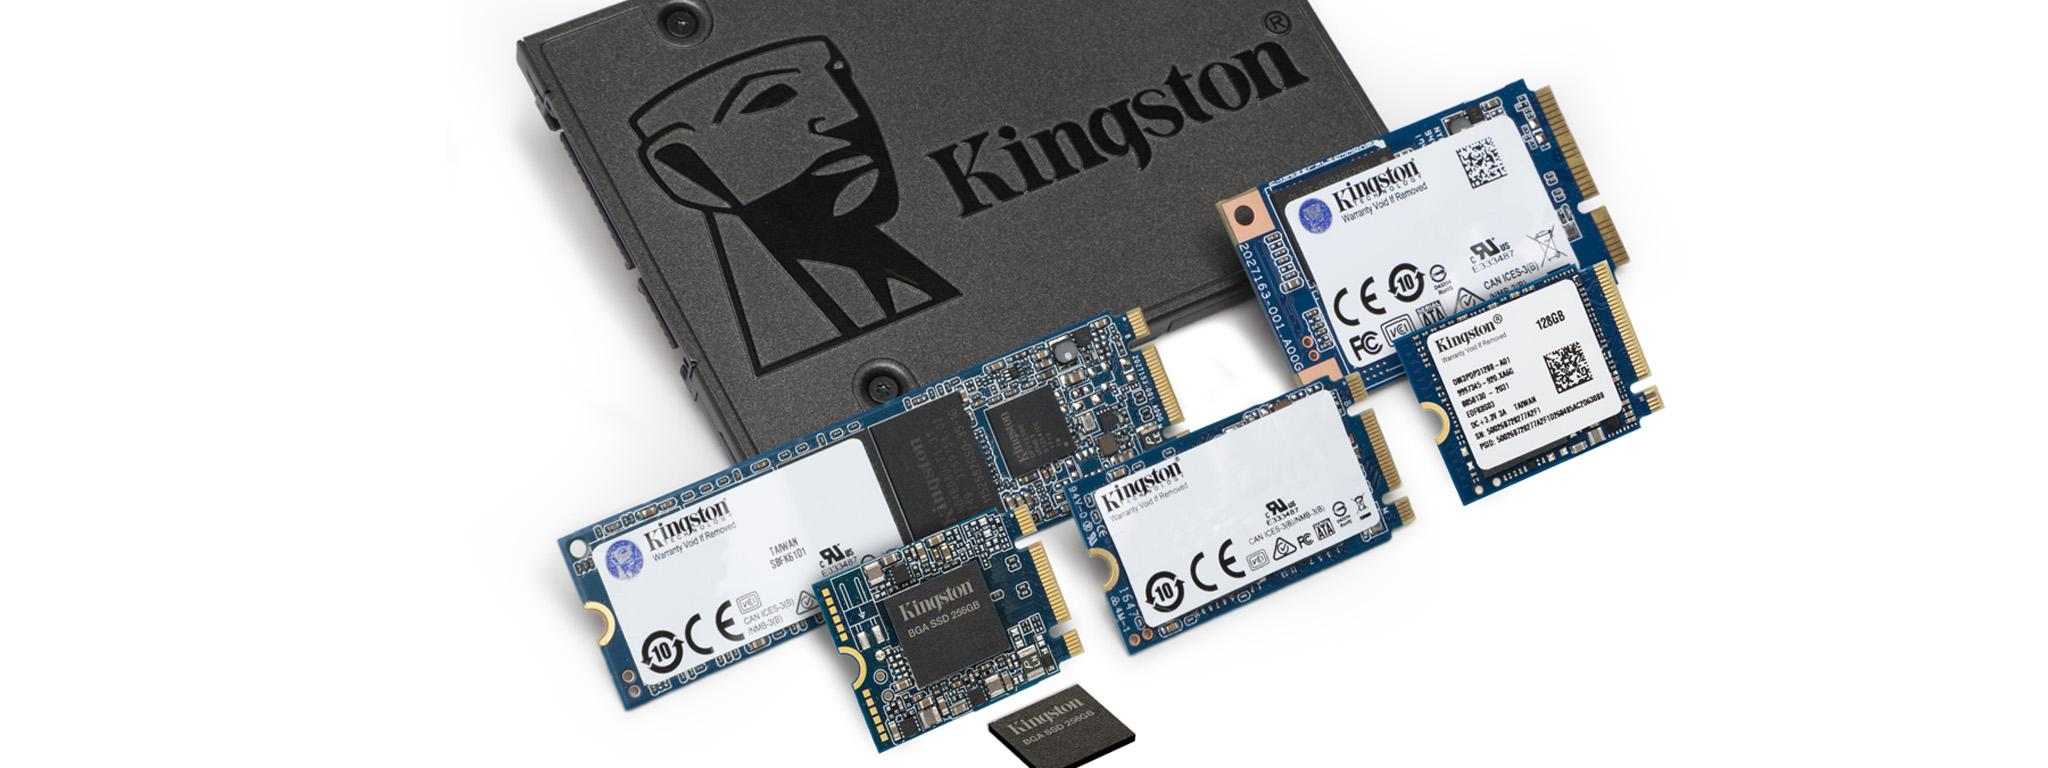 One SATA SSD, a 2230, 2280, and 2242 M.2 SSD, two mSATA SSDs and a BGA SSD package